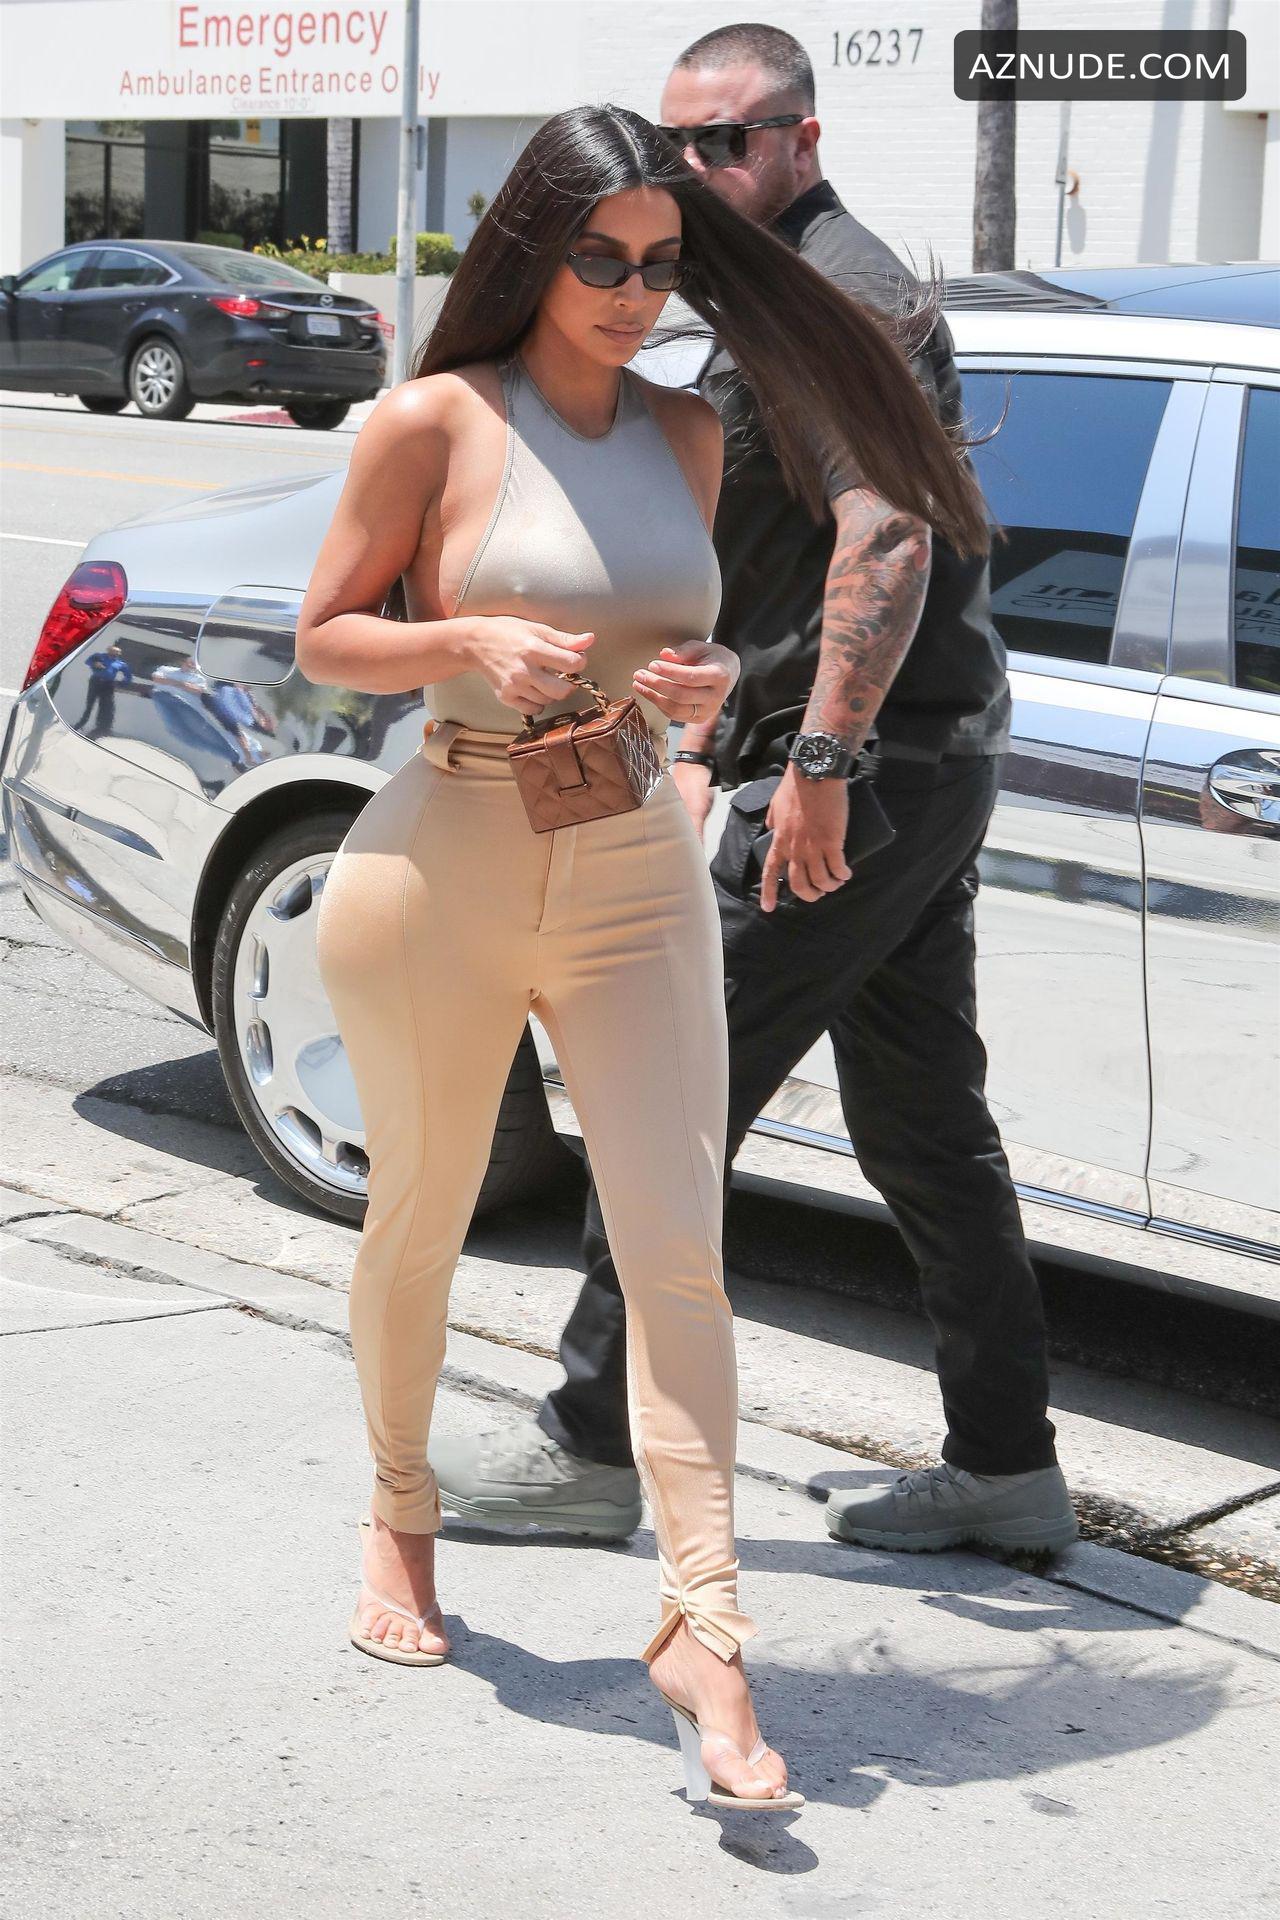 Kim Kardashian Hot At Emilio S Trattoria In Encino While Filming For Keeping Up With The